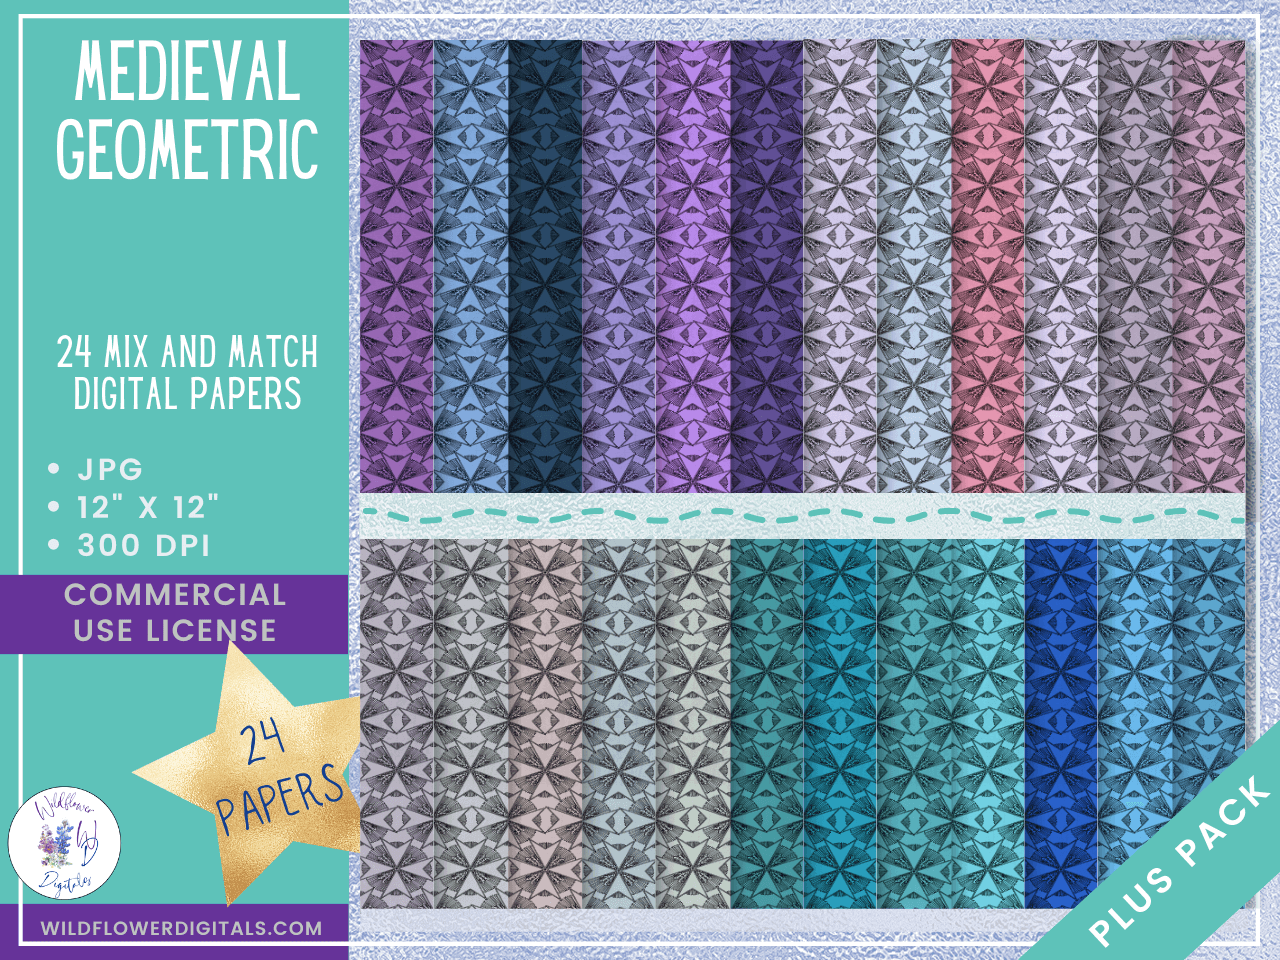 mockup of medieval geometric digital papers mix and match papers